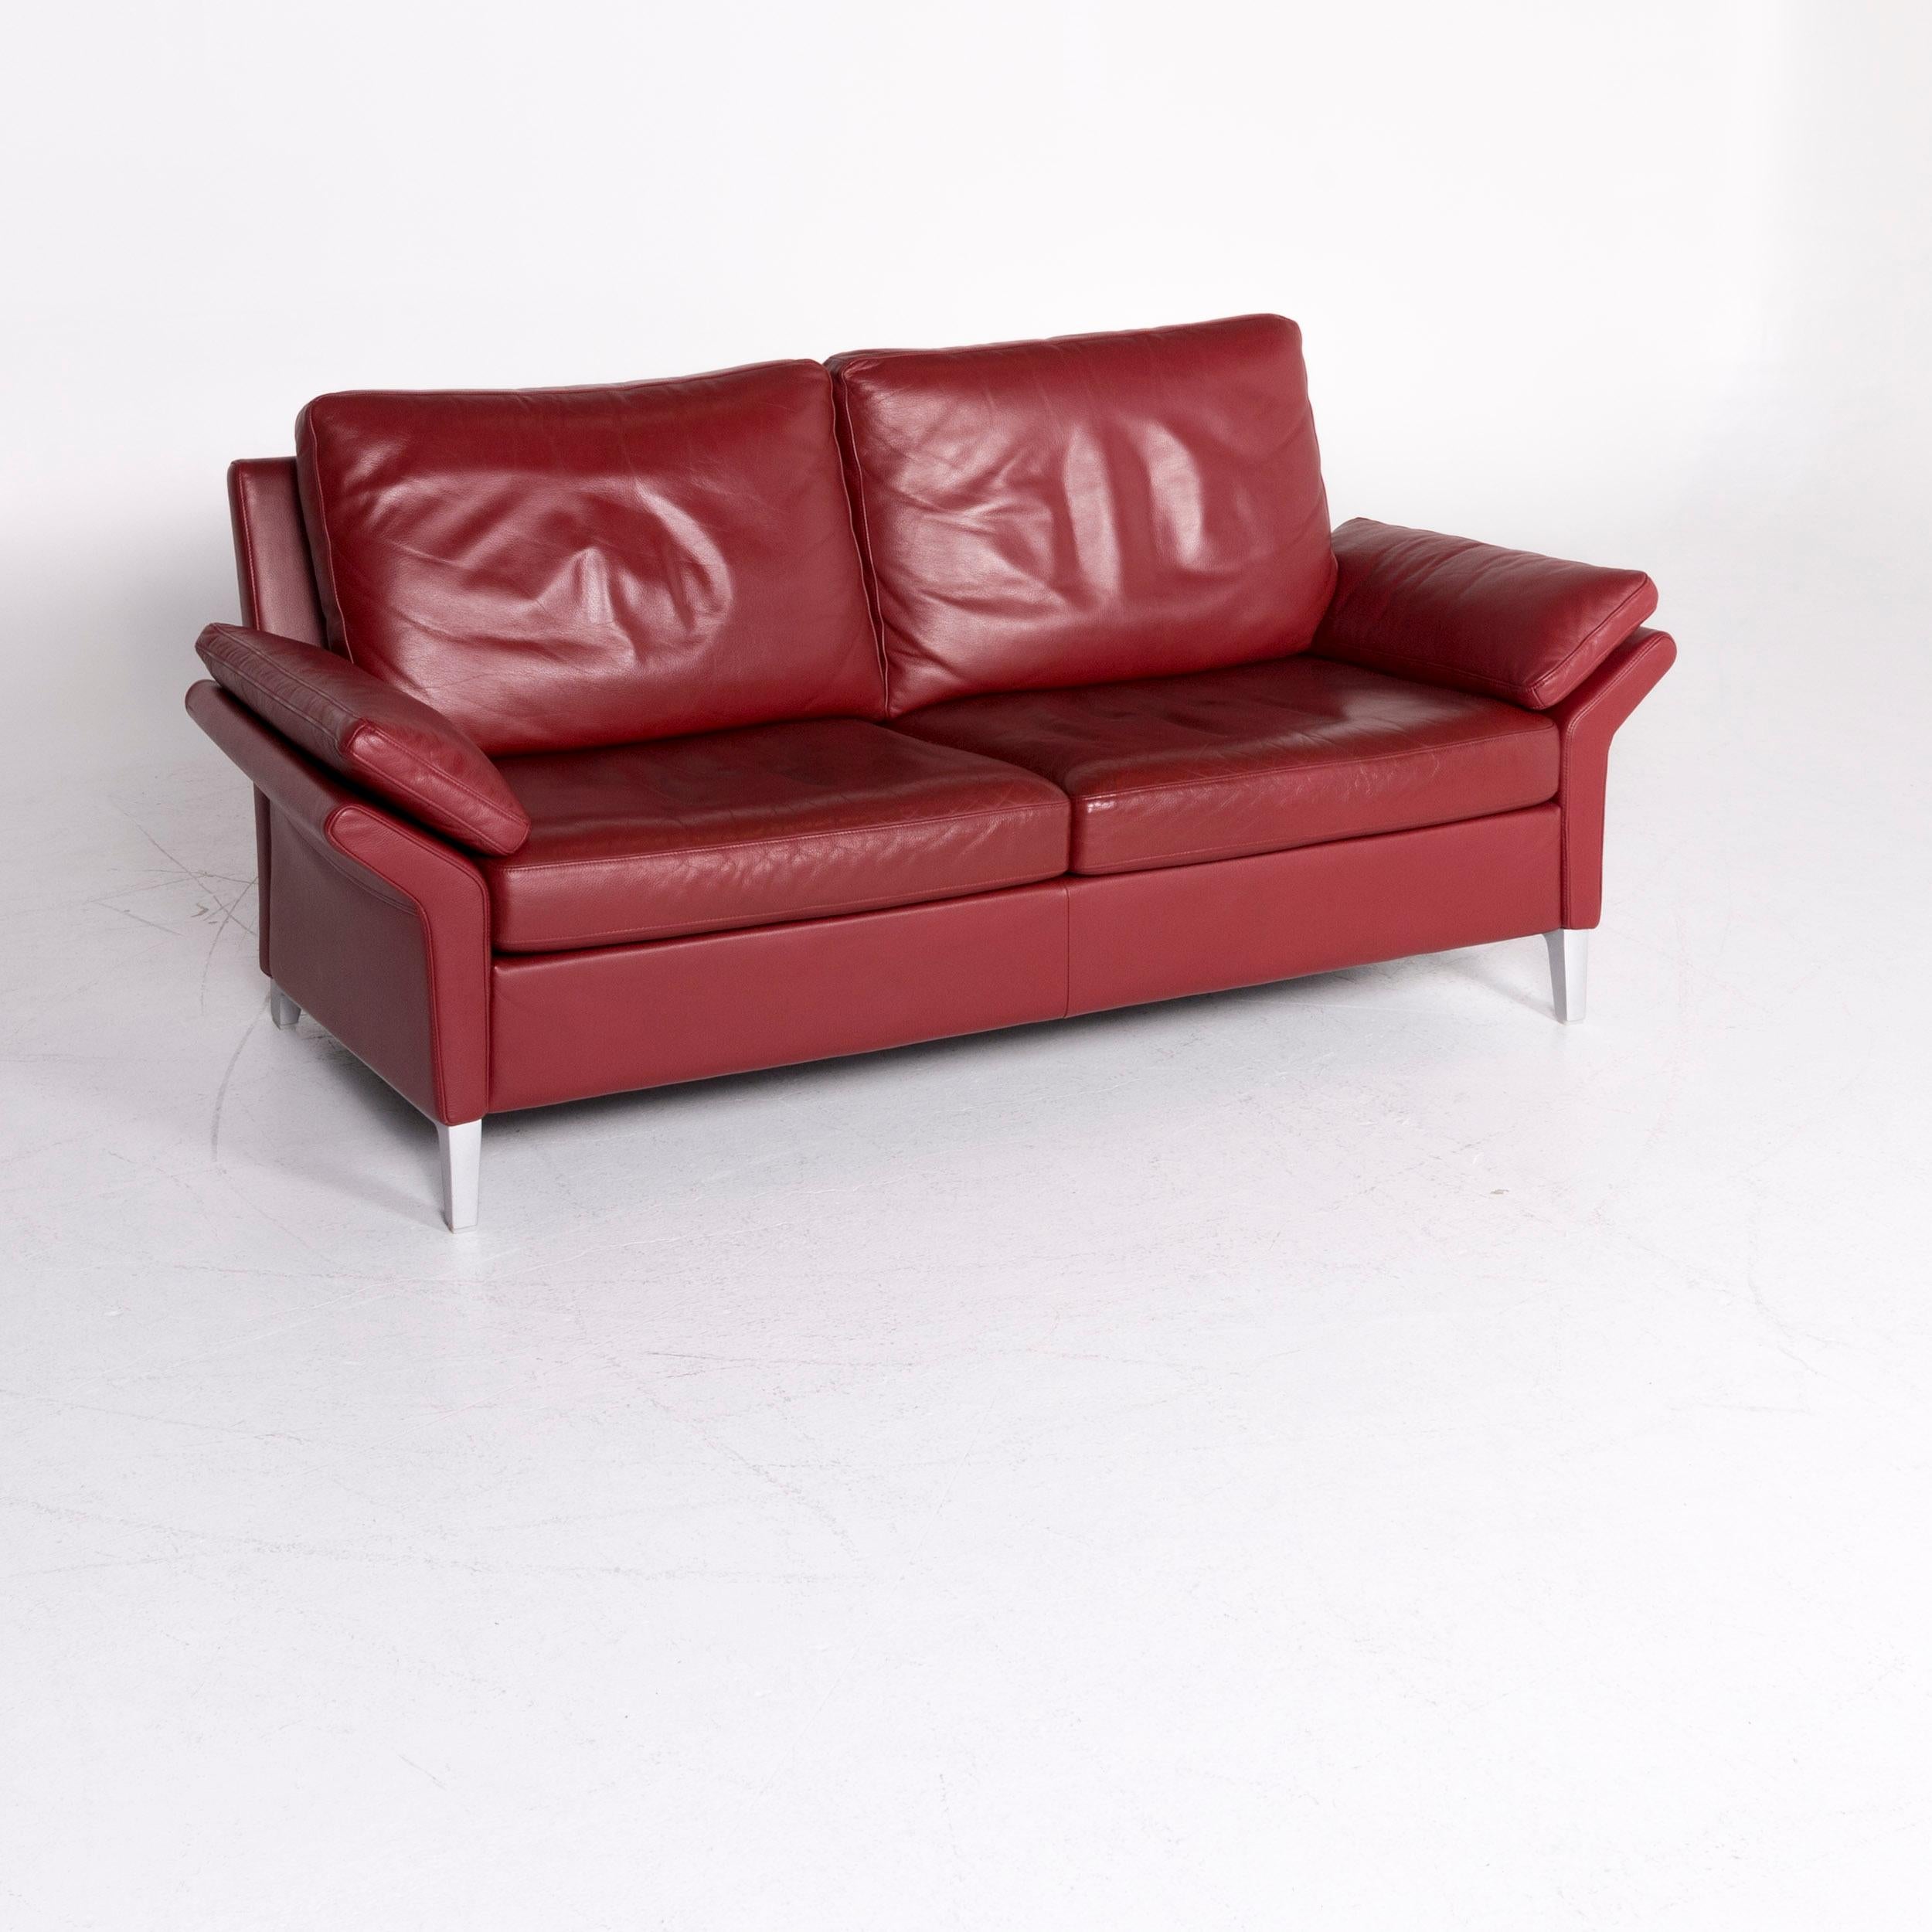 We bring to you a Rolf Benz 3300 designer leather sofa red genuine leather two-seat couch.

Product measurements in centimeters:

Depth 87
Width 183
Height 84
Seat-height 46
Rest-height 62
Seat-depth 48
Seat-width 136
Back-height 42.
  